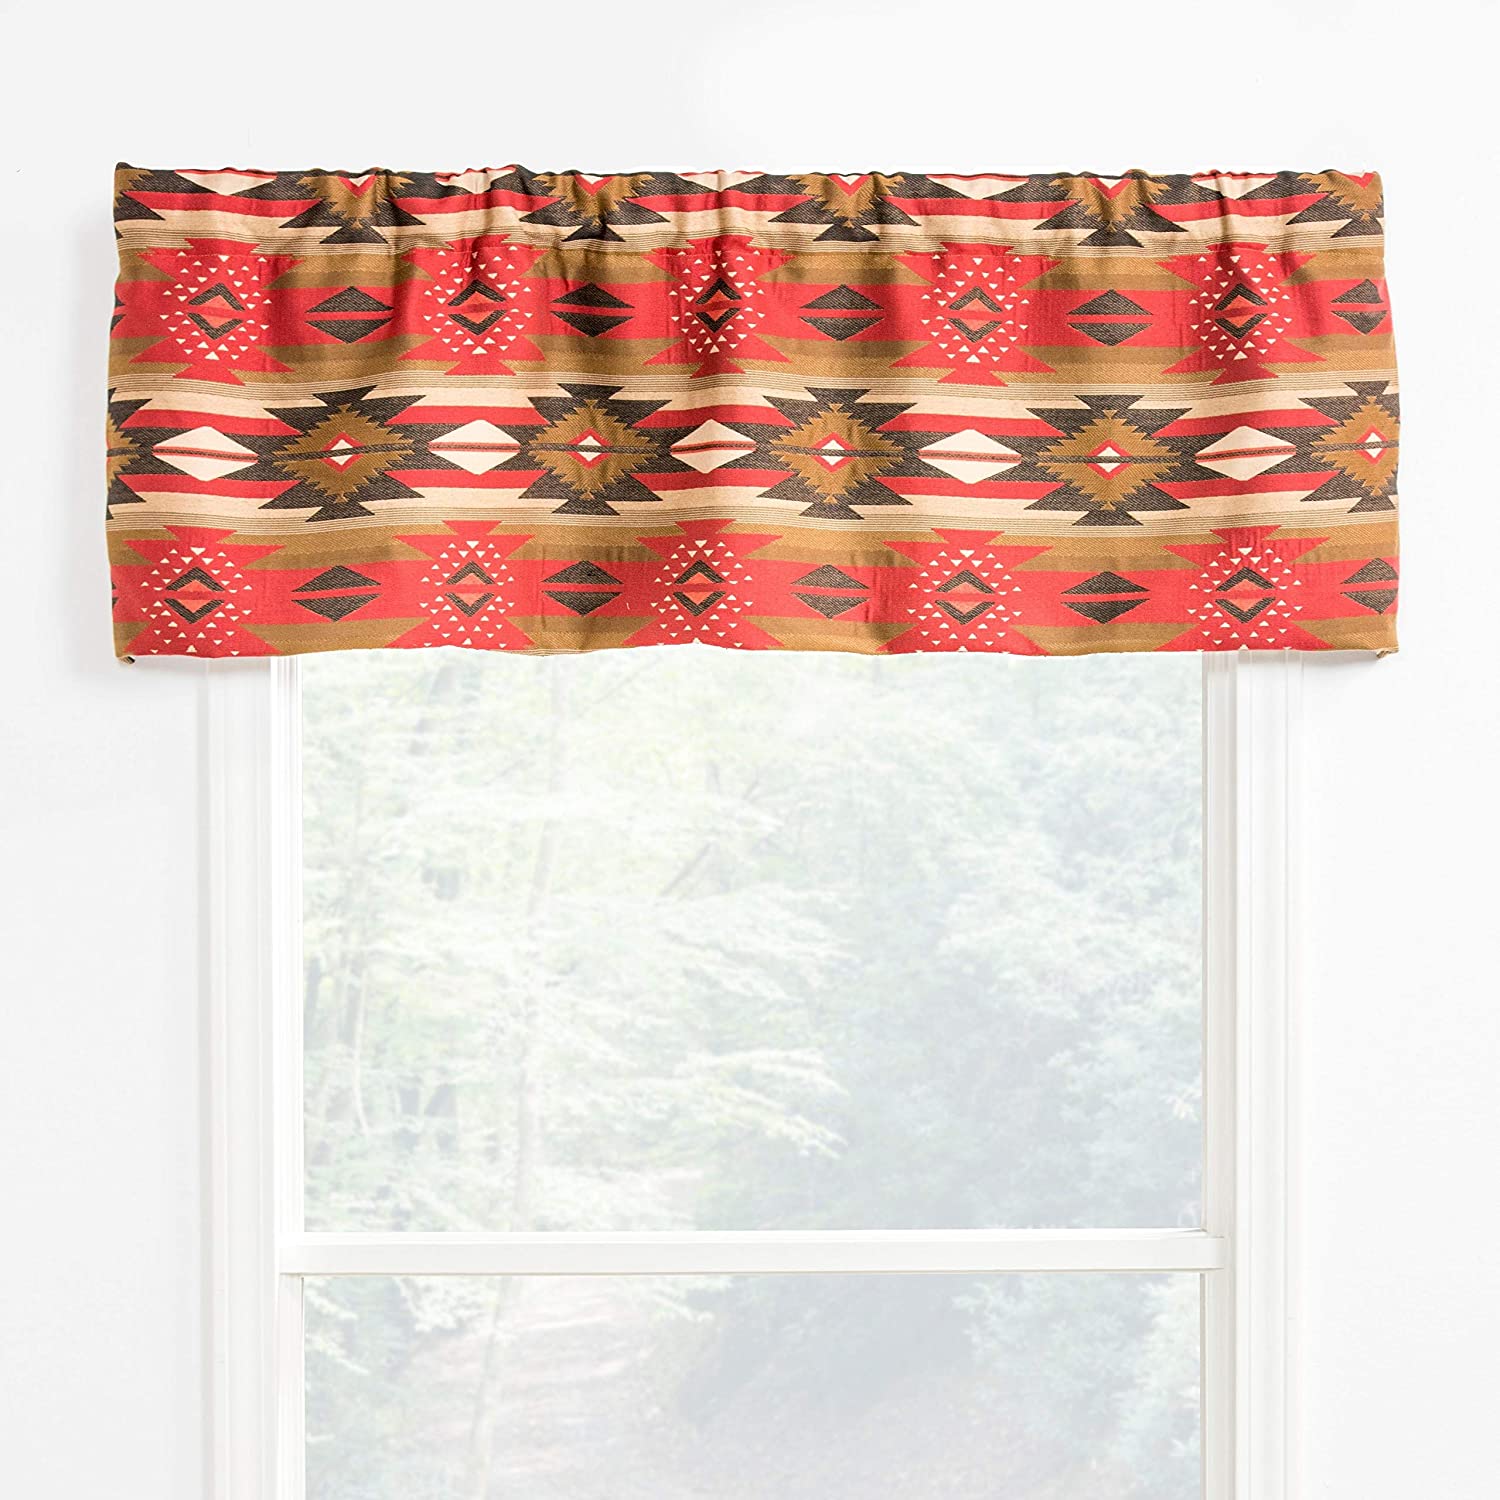 Aztec Tailored Valance Color Geometric Rustic 100% Synthetic Lined